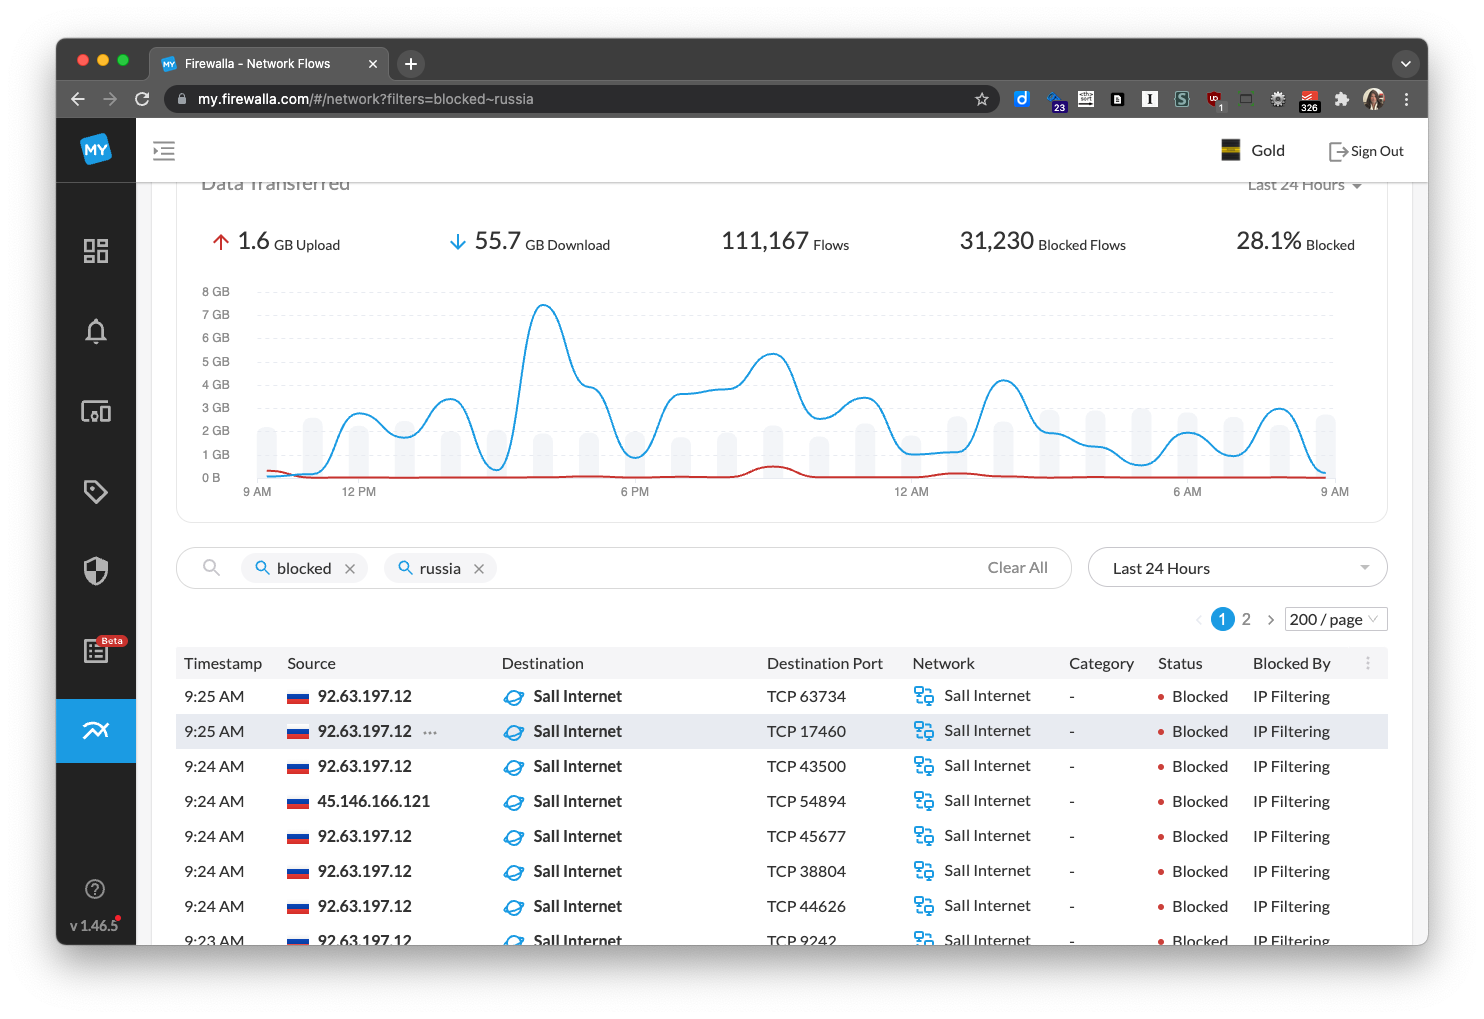 Secure your network by monitoring blocked flows from regions such as Russia